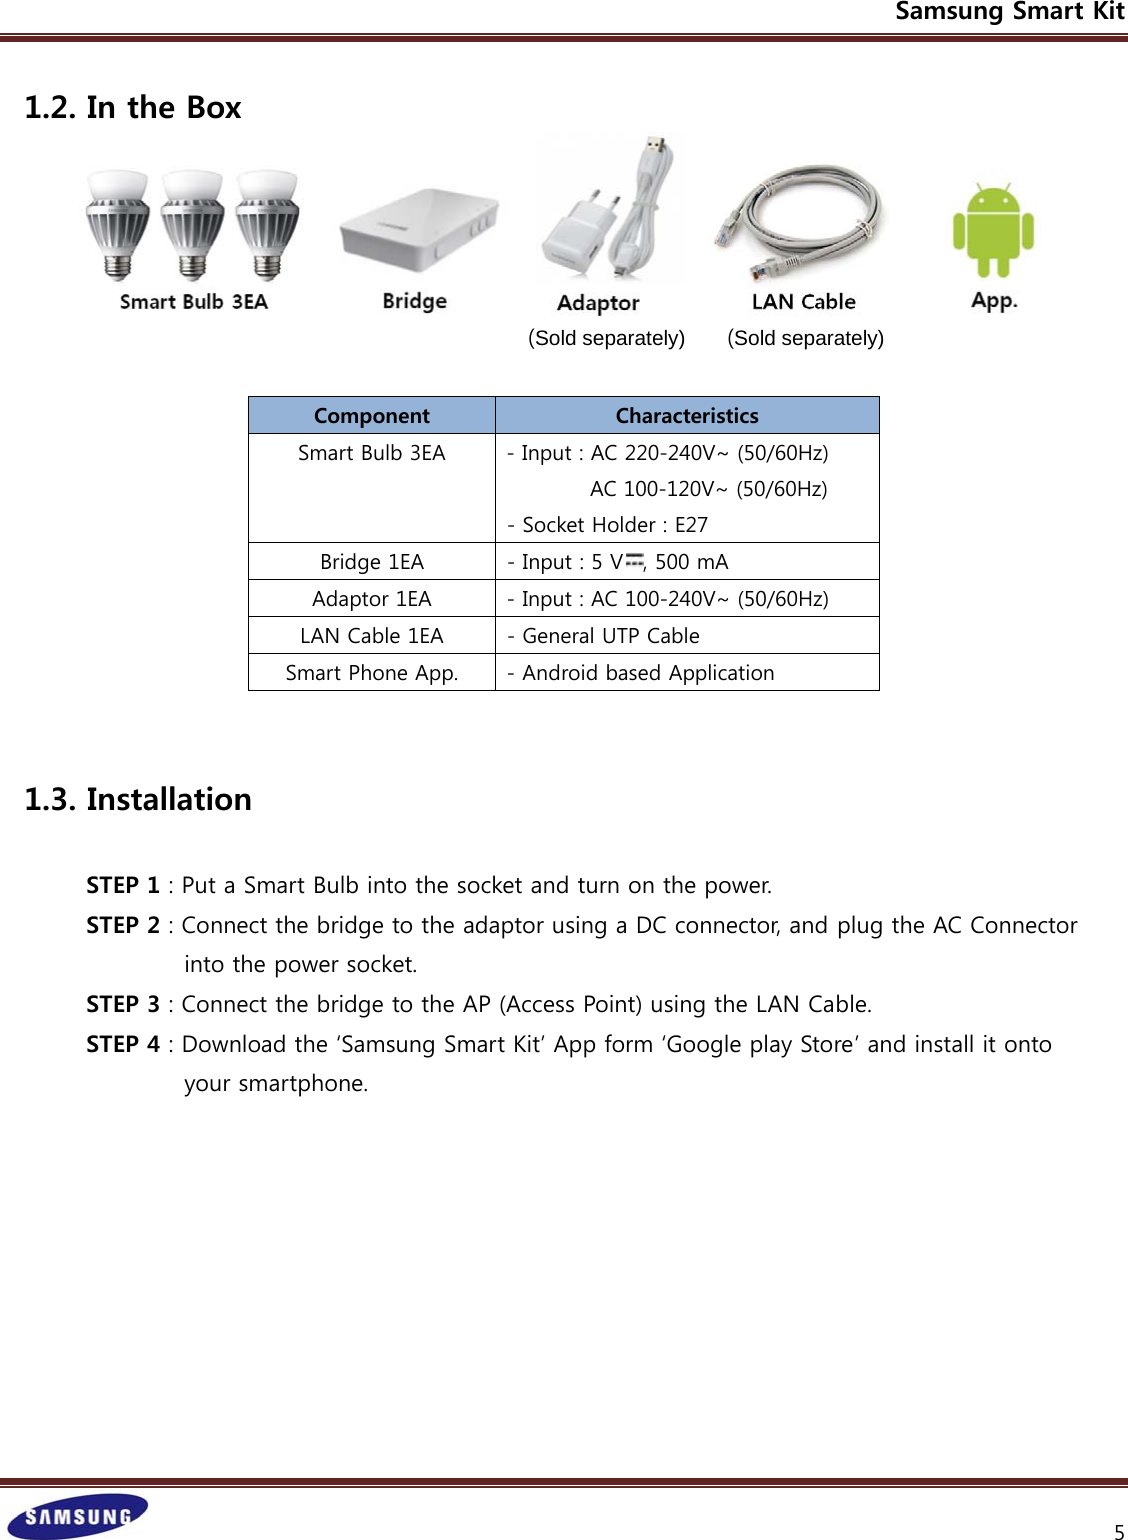 Samsung Smart Kit    5 1.2. In the Box               (Sold separately)    (Sold separately)  Component  Characteristics Smart Bulb 3EA  - Input : AC 220-240V~ (50/60Hz)                 AC 100-120V~ (50/60Hz) - Socket Holder : E27 Bridge 1EA  - Input : 5 V , 500 mA Adaptor 1EA  - Input : AC 100-240V~ (50/60Hz) LAN Cable 1EA  - General UTP Cable Smart Phone App.  - Android based Application   1.3. Installation      STEP 1 : Put a Smart Bulb into the socket and turn on the power.     STEP 2 : Connect the bridge to the adaptor using a DC connector, and plug the AC Connector               into the power socket.  STEP 3 : Connect the bridge to the AP (Access Point) using the LAN Cable.  STEP 4 : Download the ‘Samsung Smart Kit’ App form ‘Google play Store’ and install it onto                 your smartphone.          